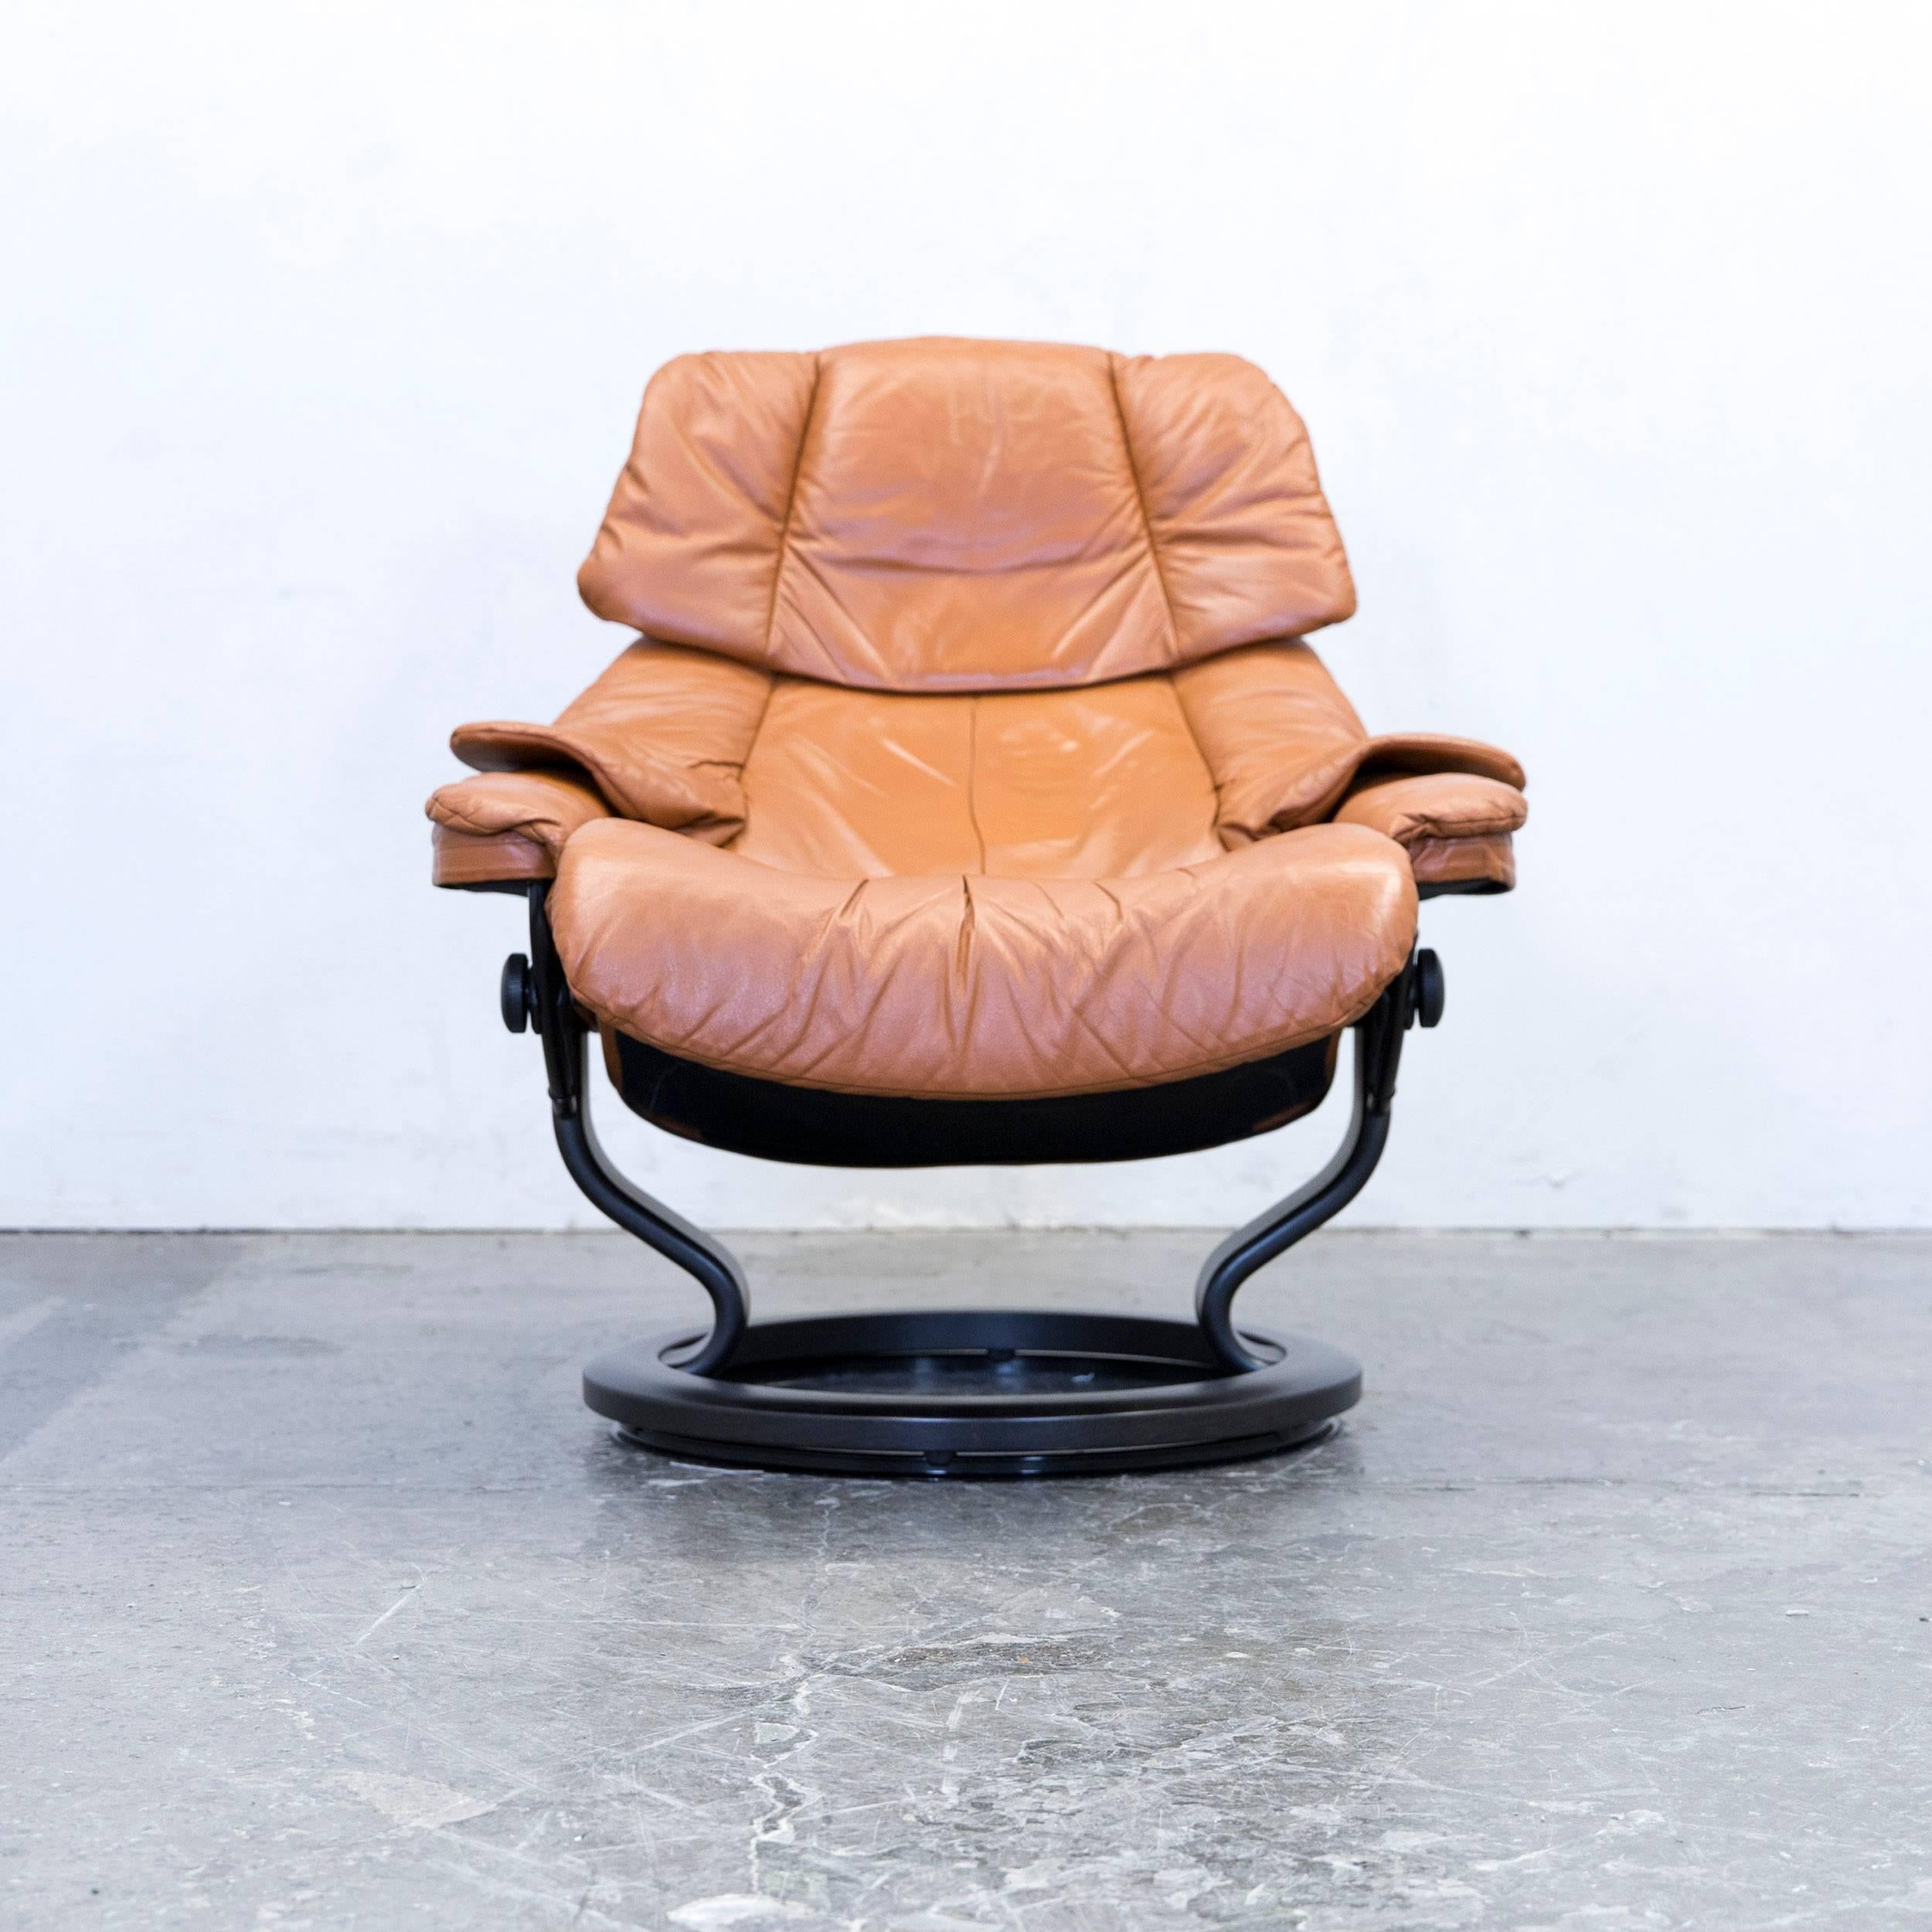 Ocre brown colored original Stressless designer leather Swivel chair in a minimalistic and modern design, with convenient functions, made for pure comfort and flexibility.